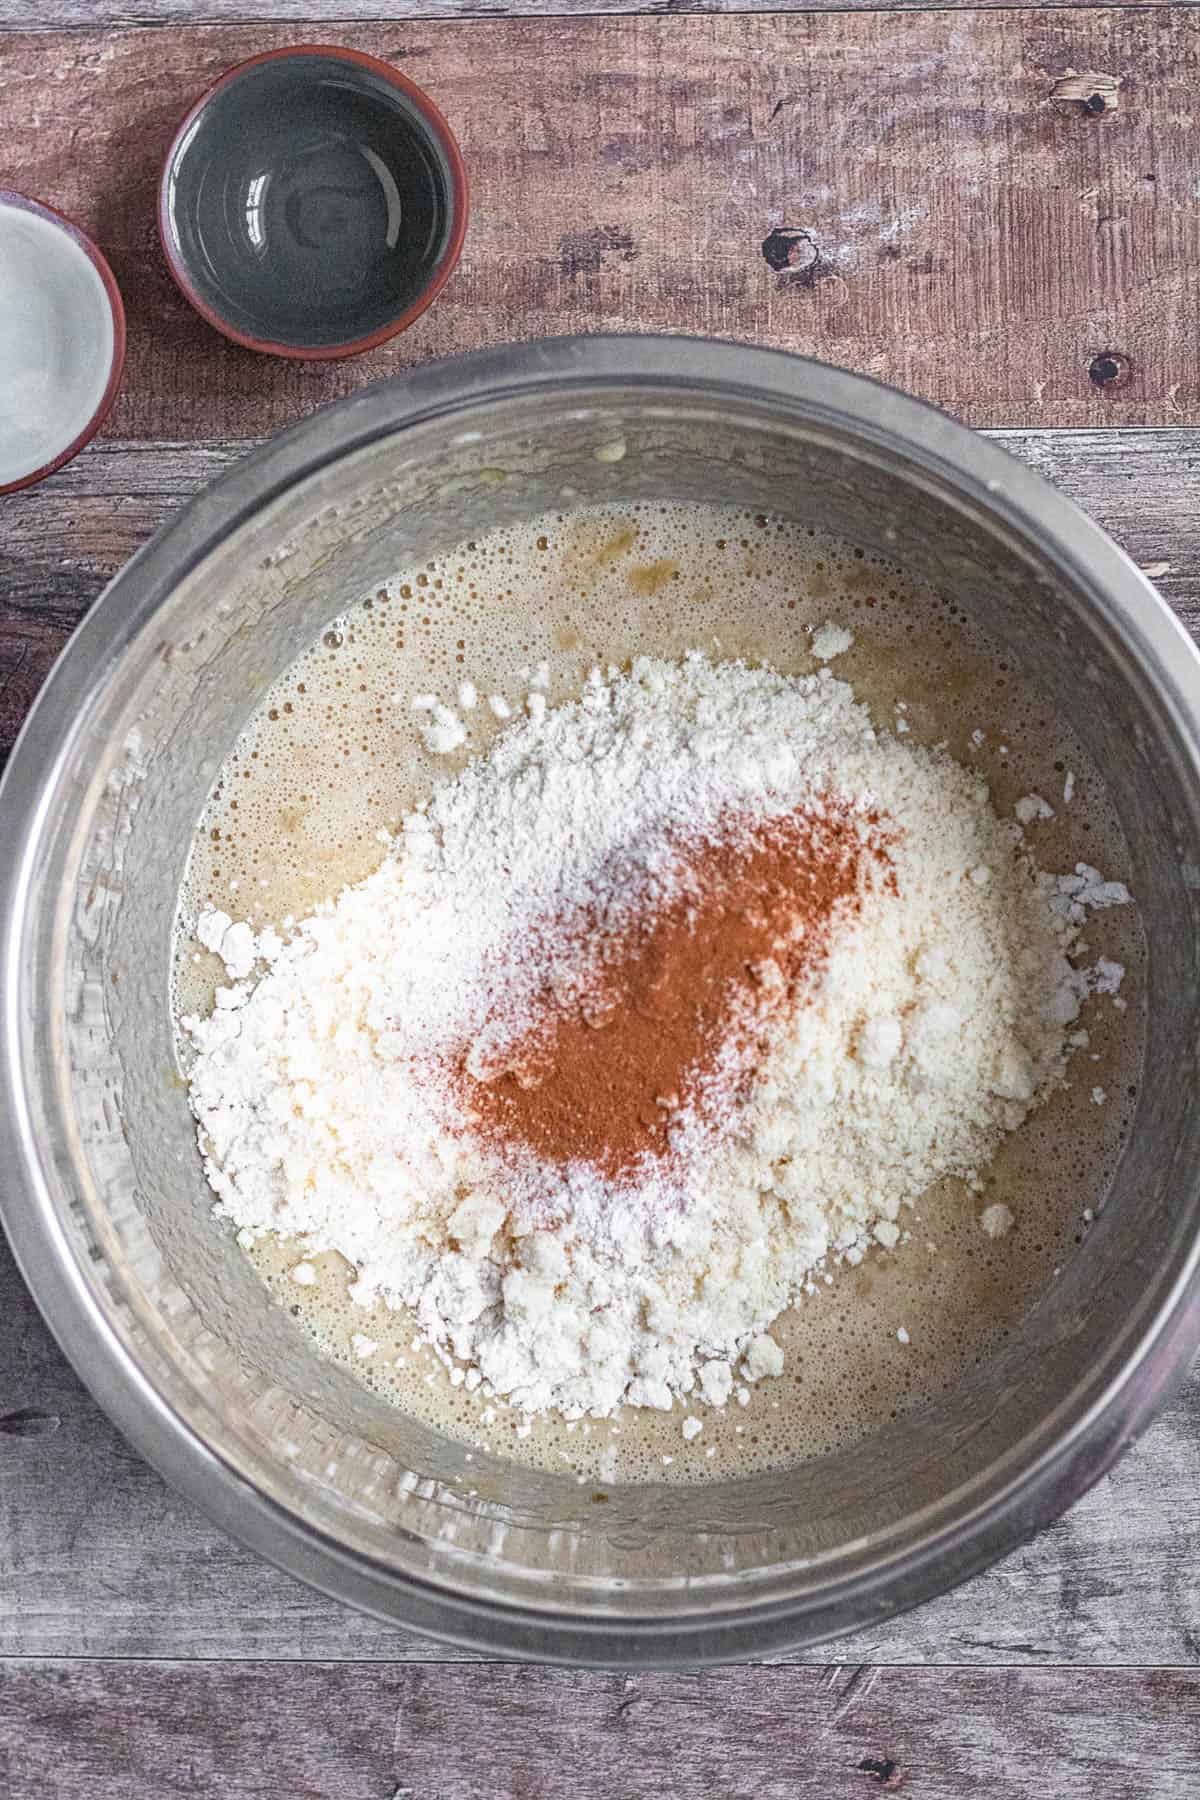 gluten free flour, almond flour, baking powder, baking soda, salt, and cinnamon in metal bowl with mixed wet ingredients and mashed bananas with a dark colored background